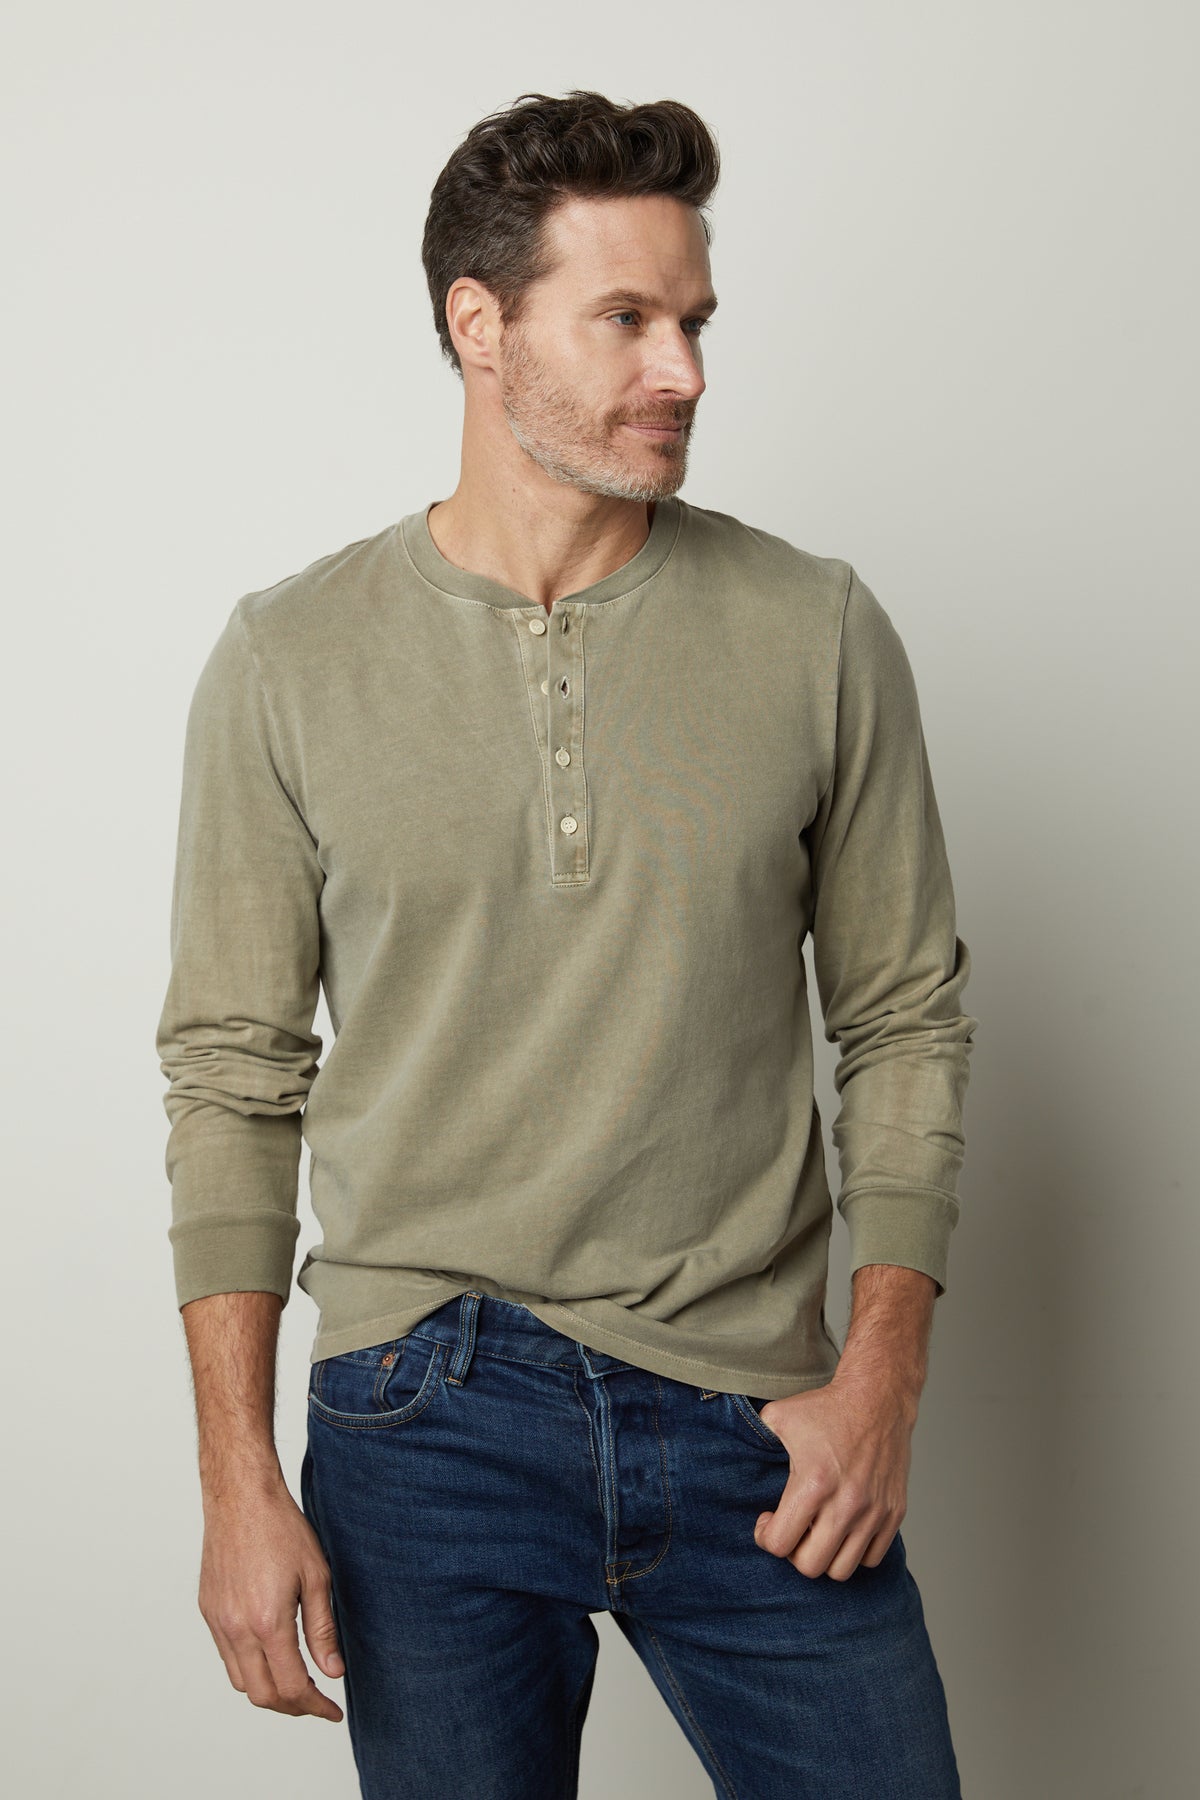 The man is wearing jeans and a REMI HENLEY shirt by Velvet by Graham & Spencer.-26827678023873